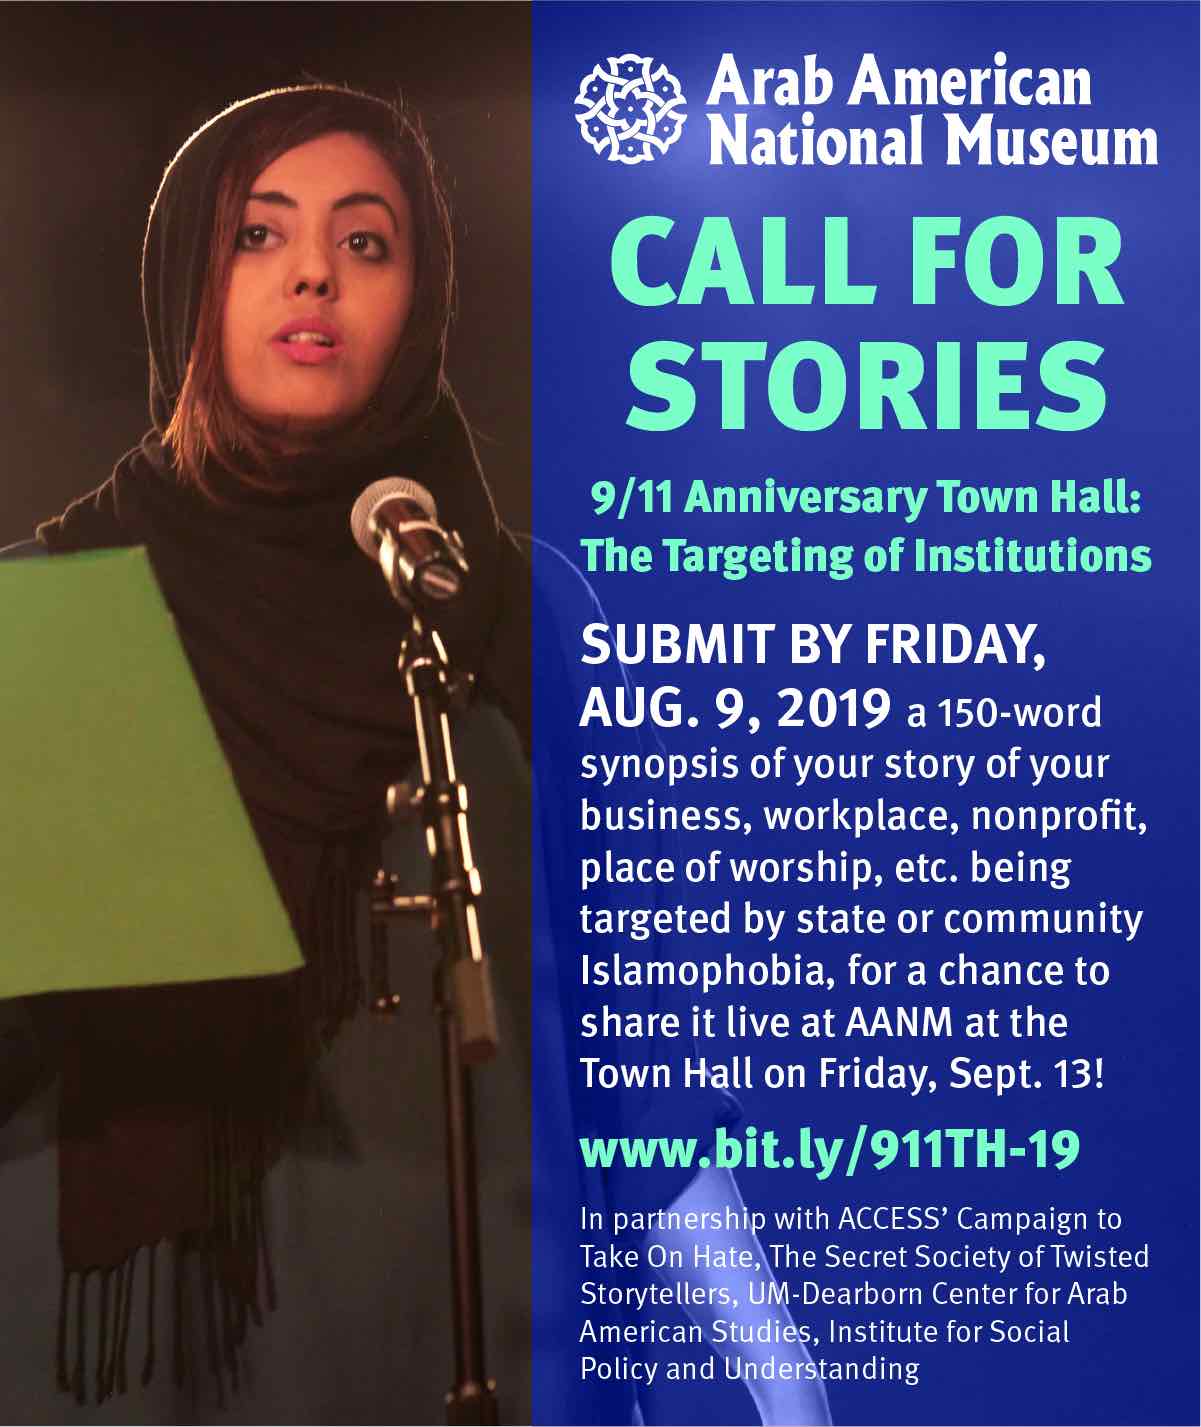 Call for Stories: Submit by Friday, August 9, 2019 a 150-word synopsis of your story of your business, workplace, nonprofit, place of worship, etc. being targeted by state or community Islamophobia, for a change to share it live at the Arab American National Museum at the Town Hall on Friday, Sept. 13